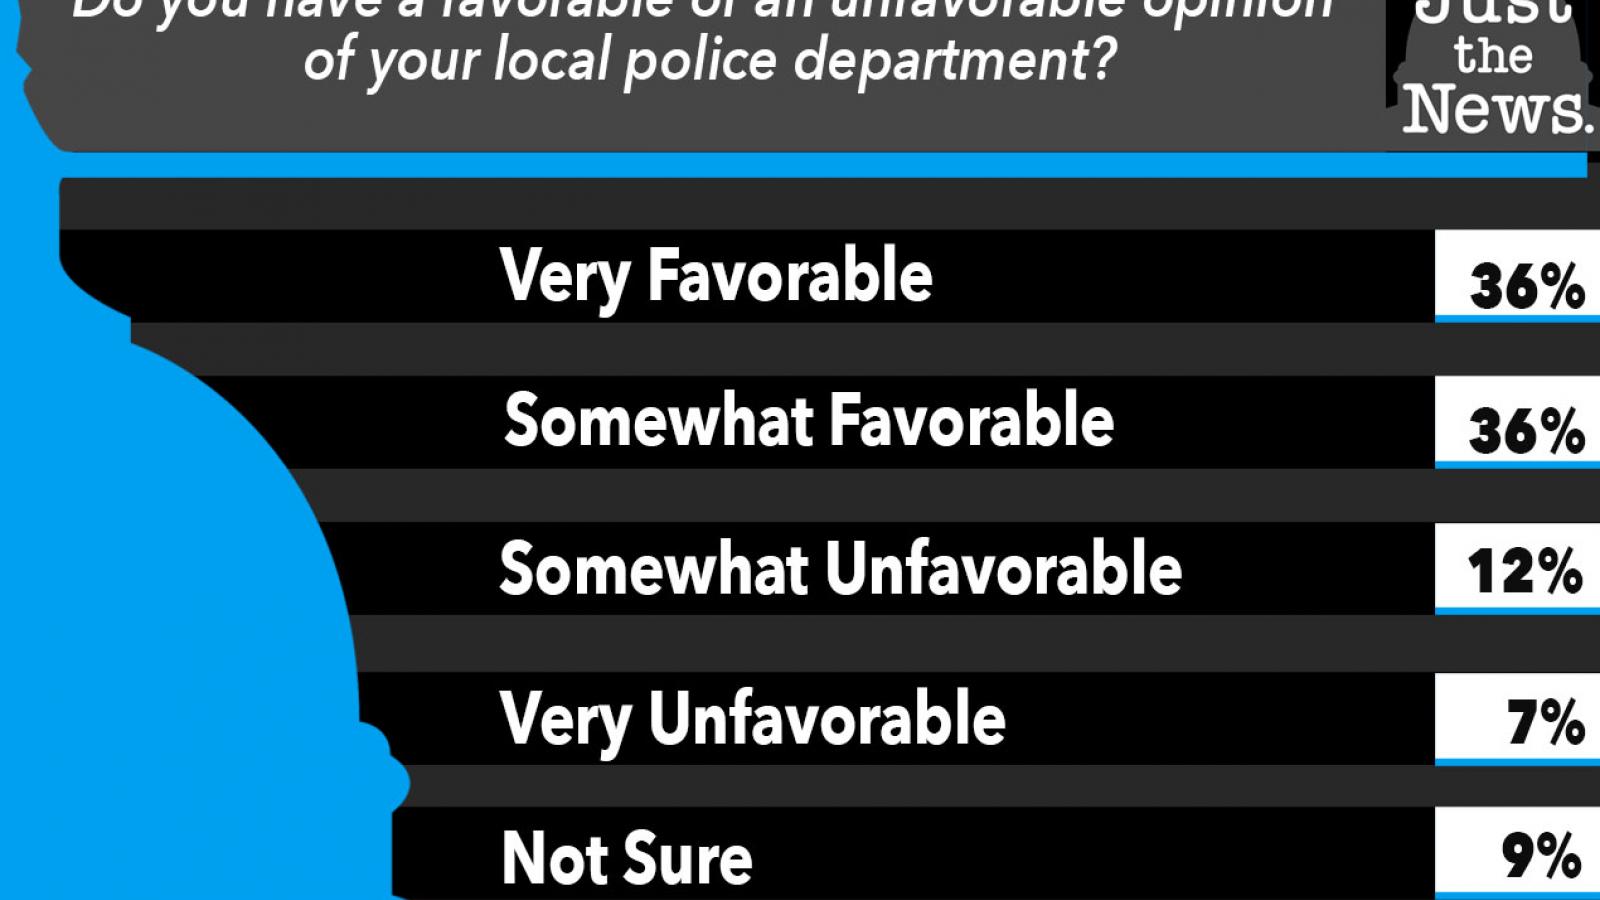 Just the News Poll, Do you have a favorable opinion of your local police dept?